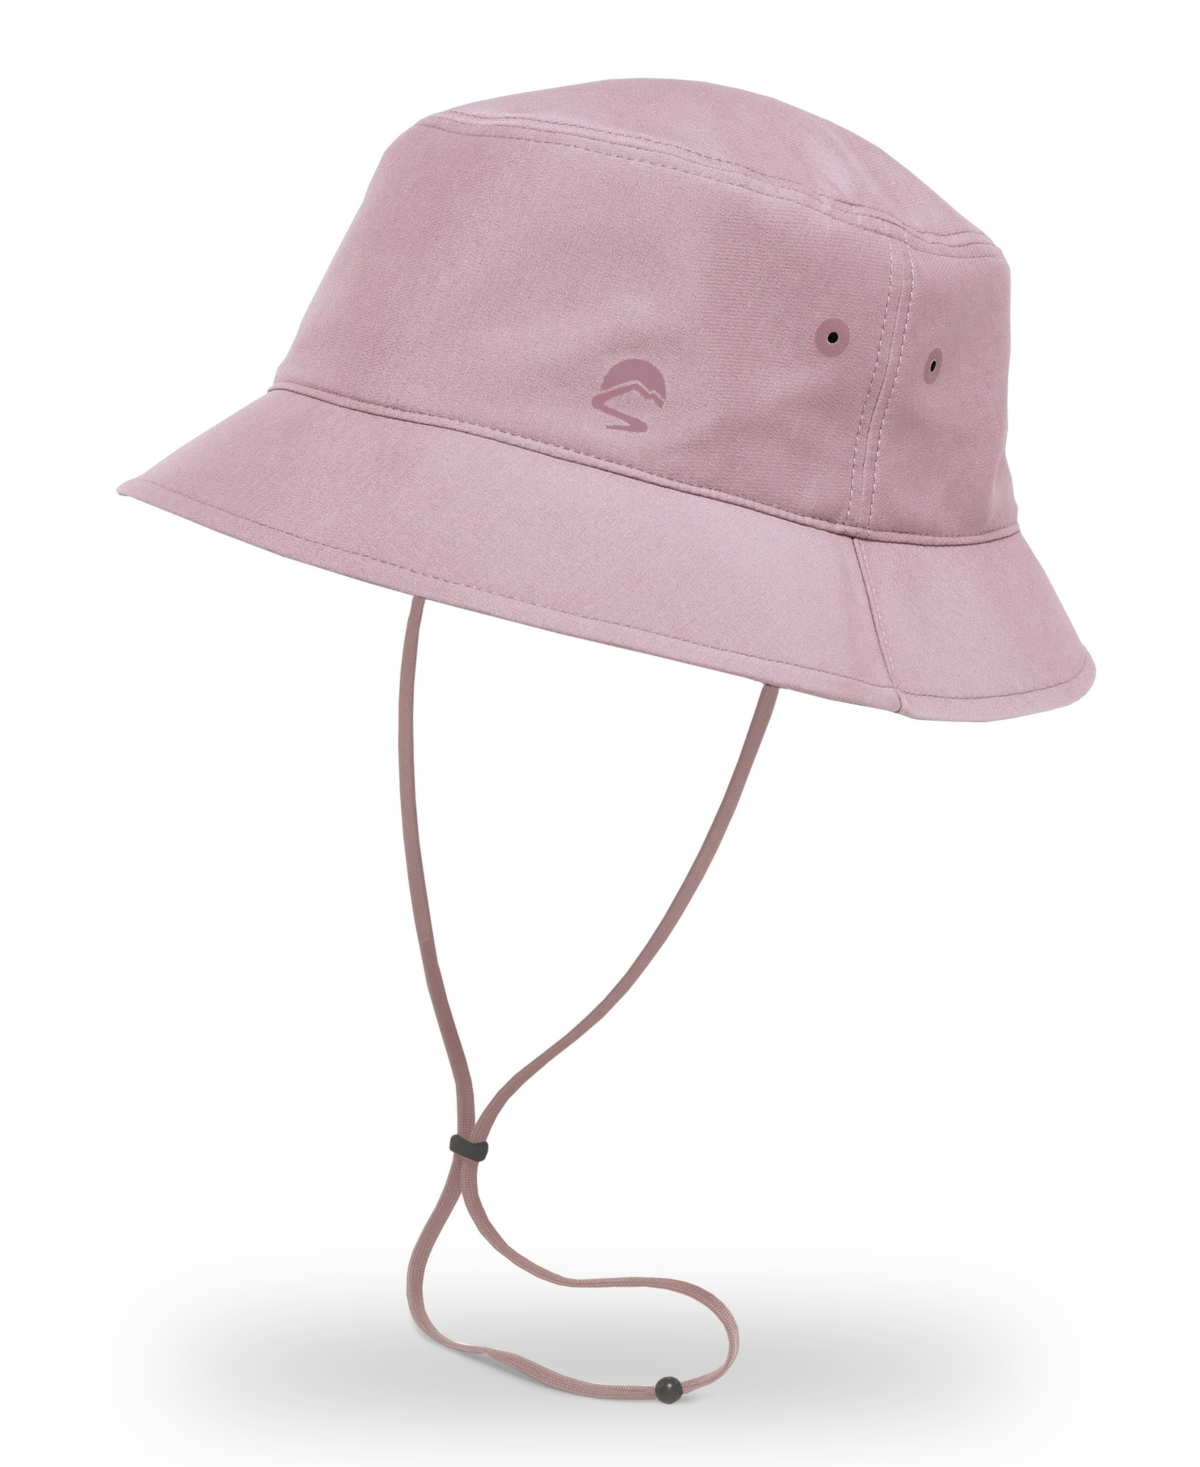 Sunday Afternoons Sunward Bucket Hat In Dusty Rose